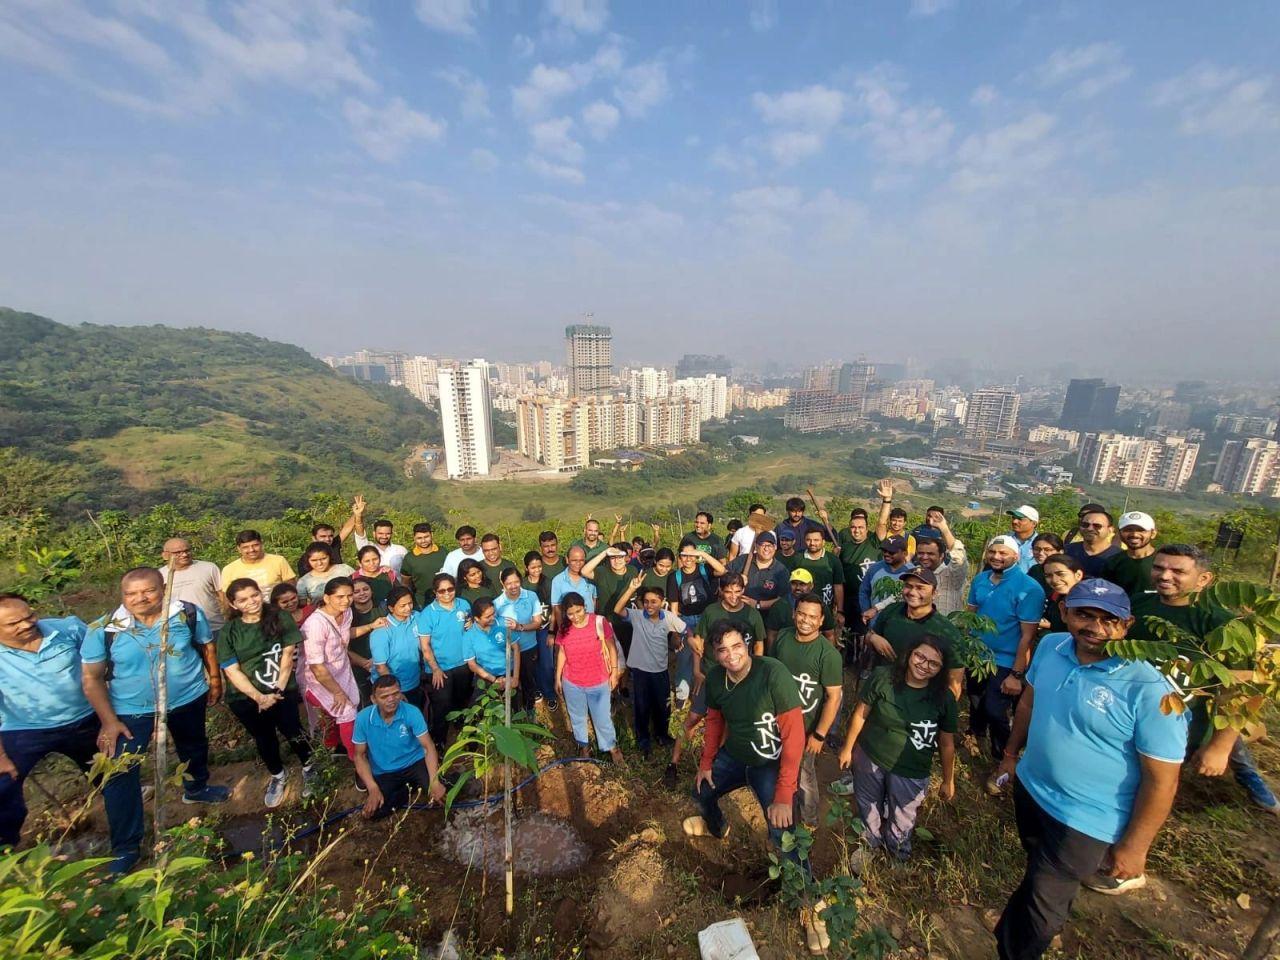 A large group of volunteers posed on a hillside, a city landscape behind them.